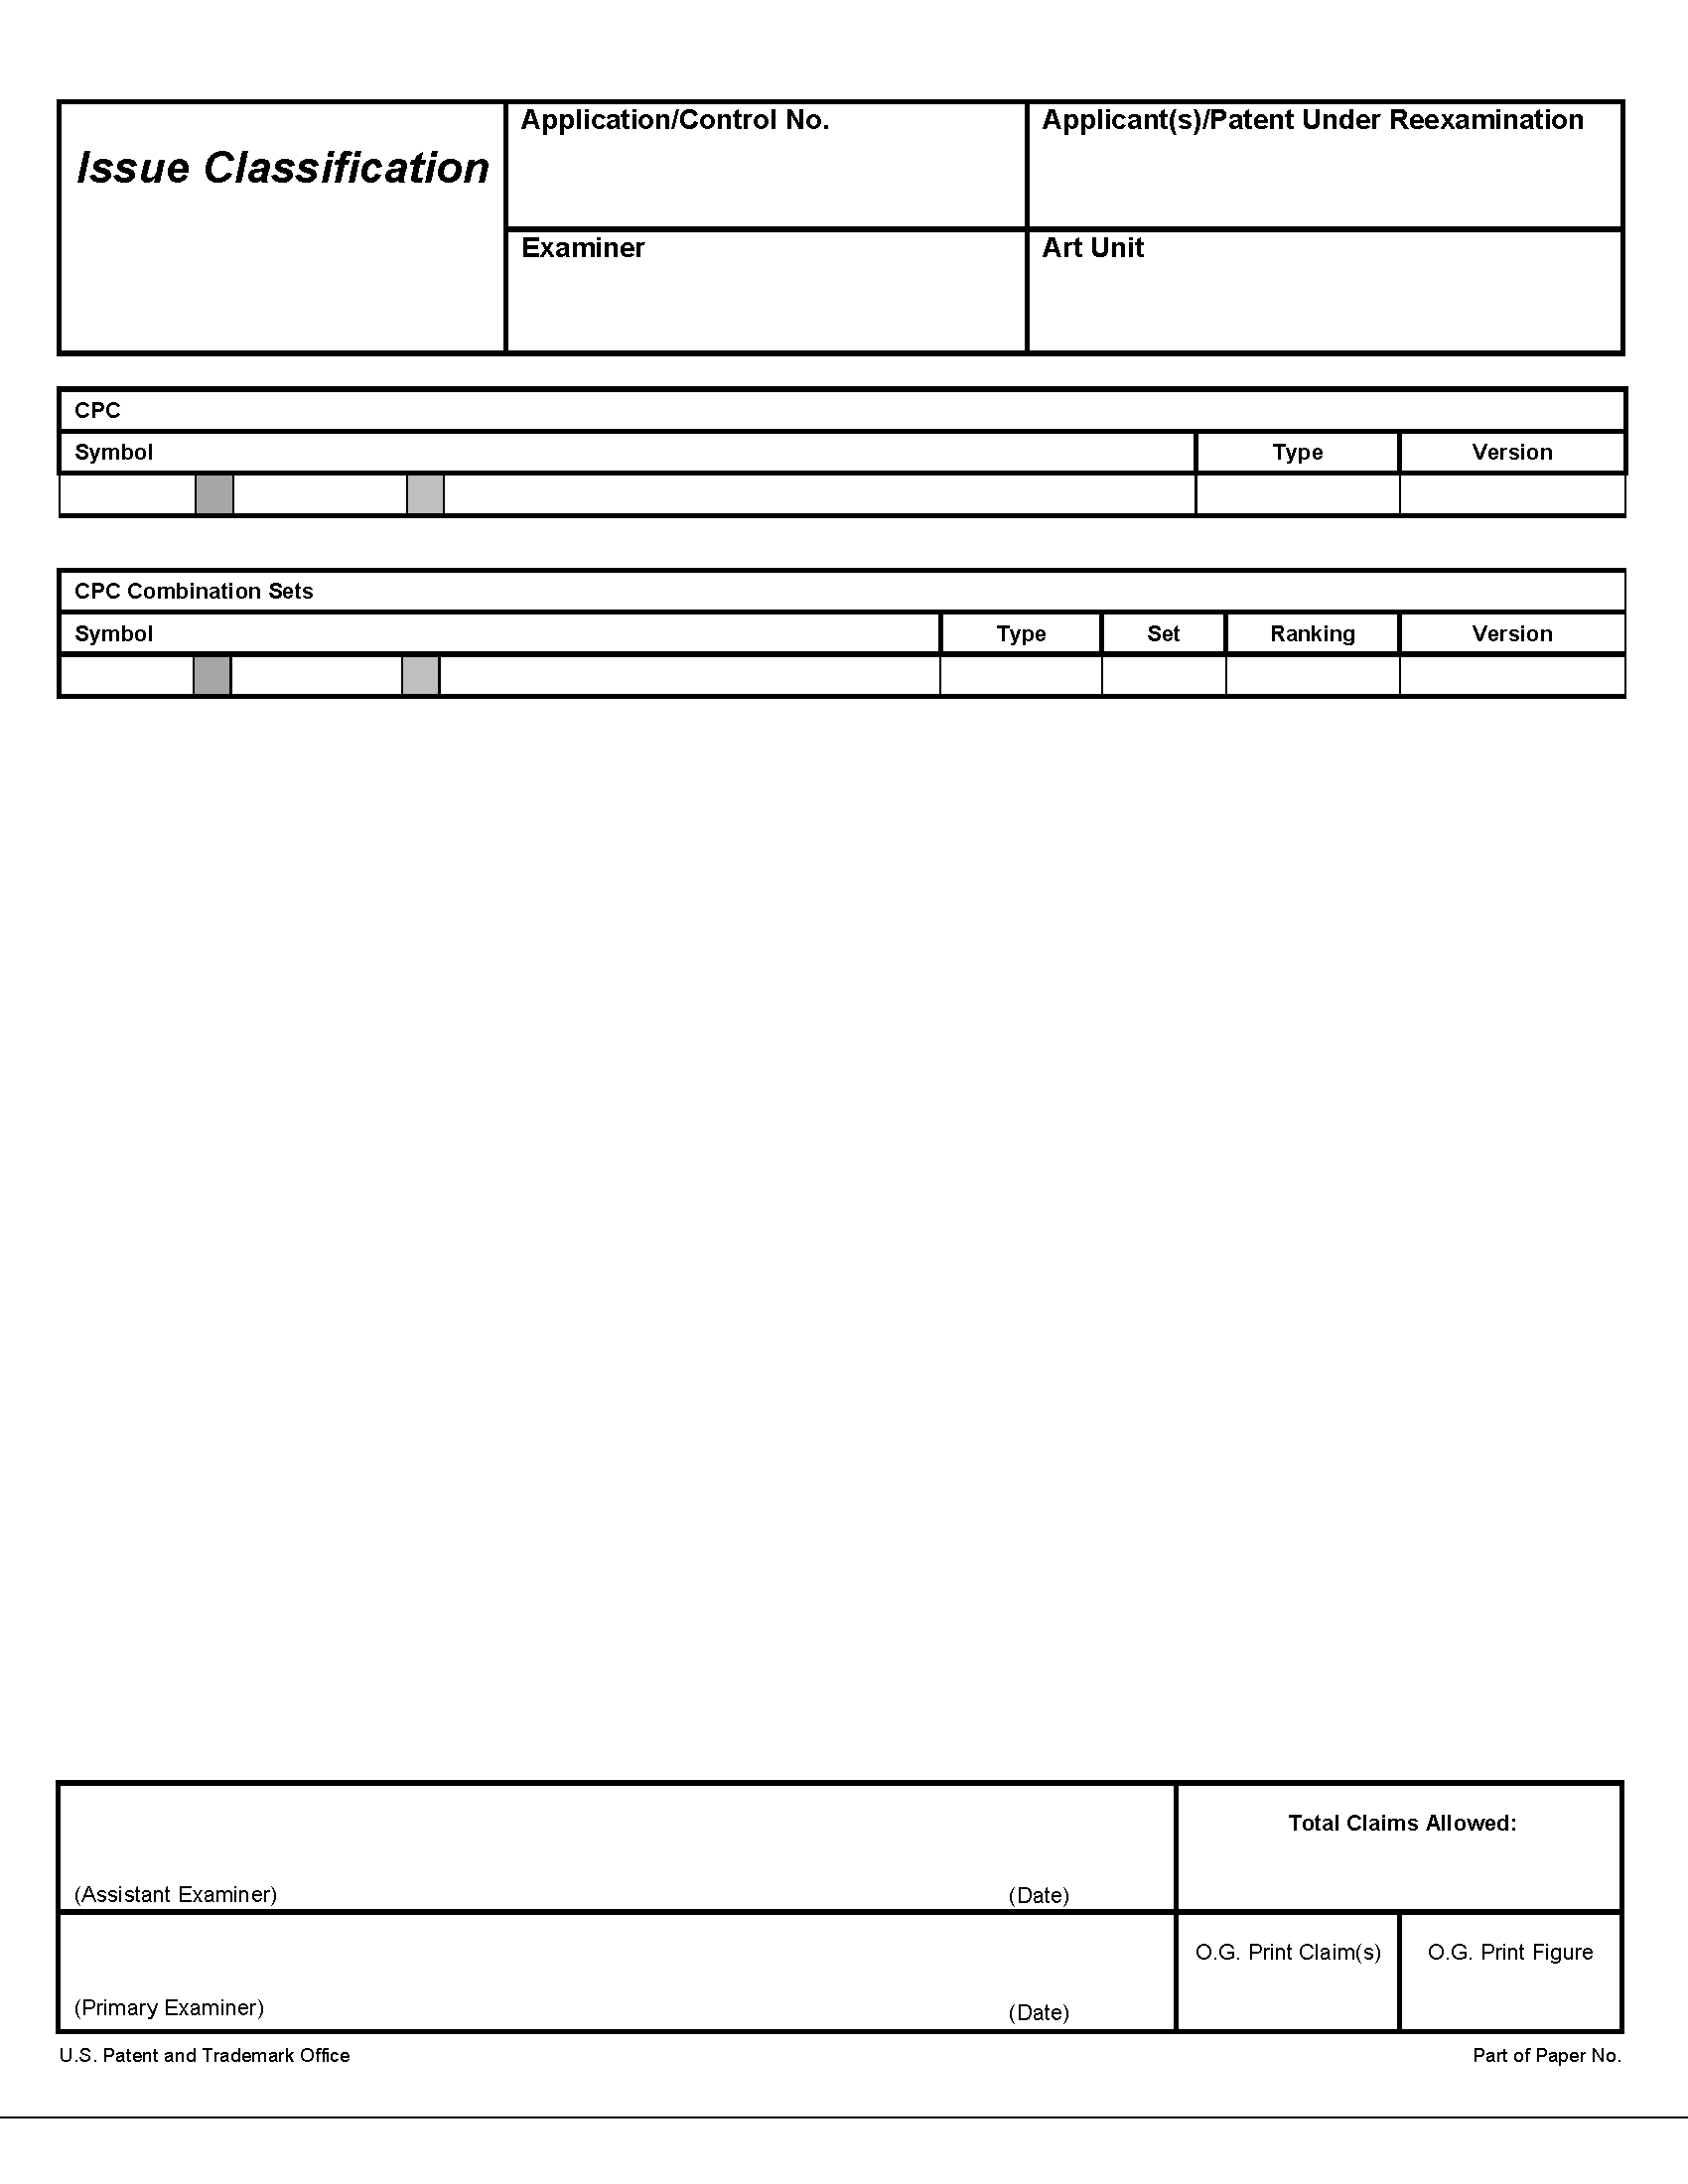 Issue Classification Sheet page 1